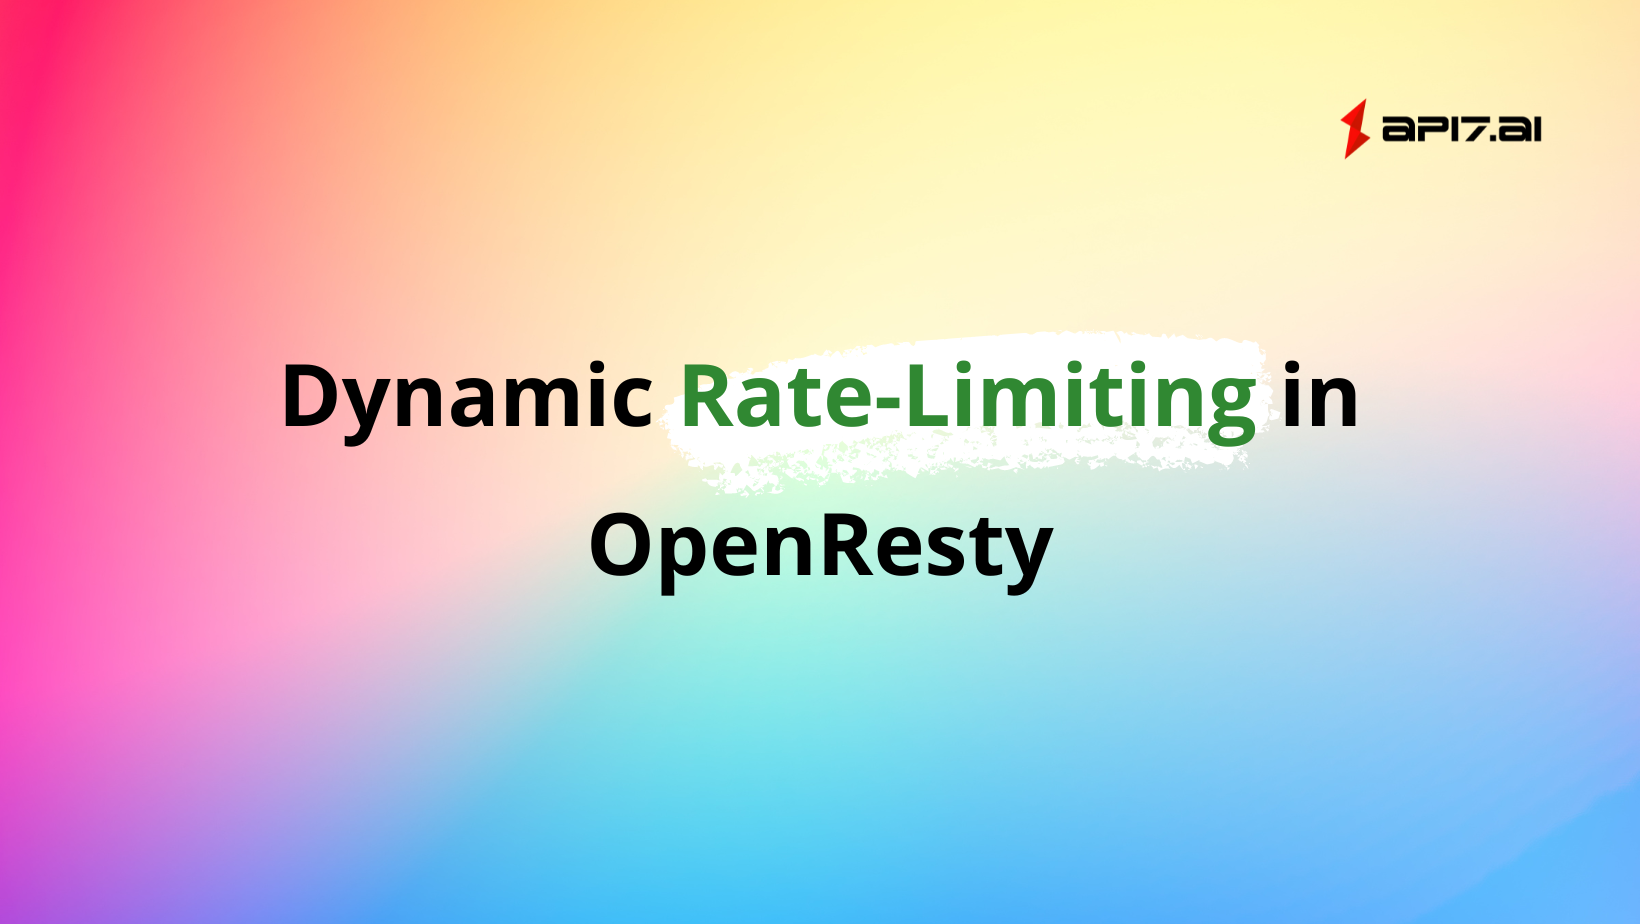 Dynamic Rate-Limiting in OpenResty